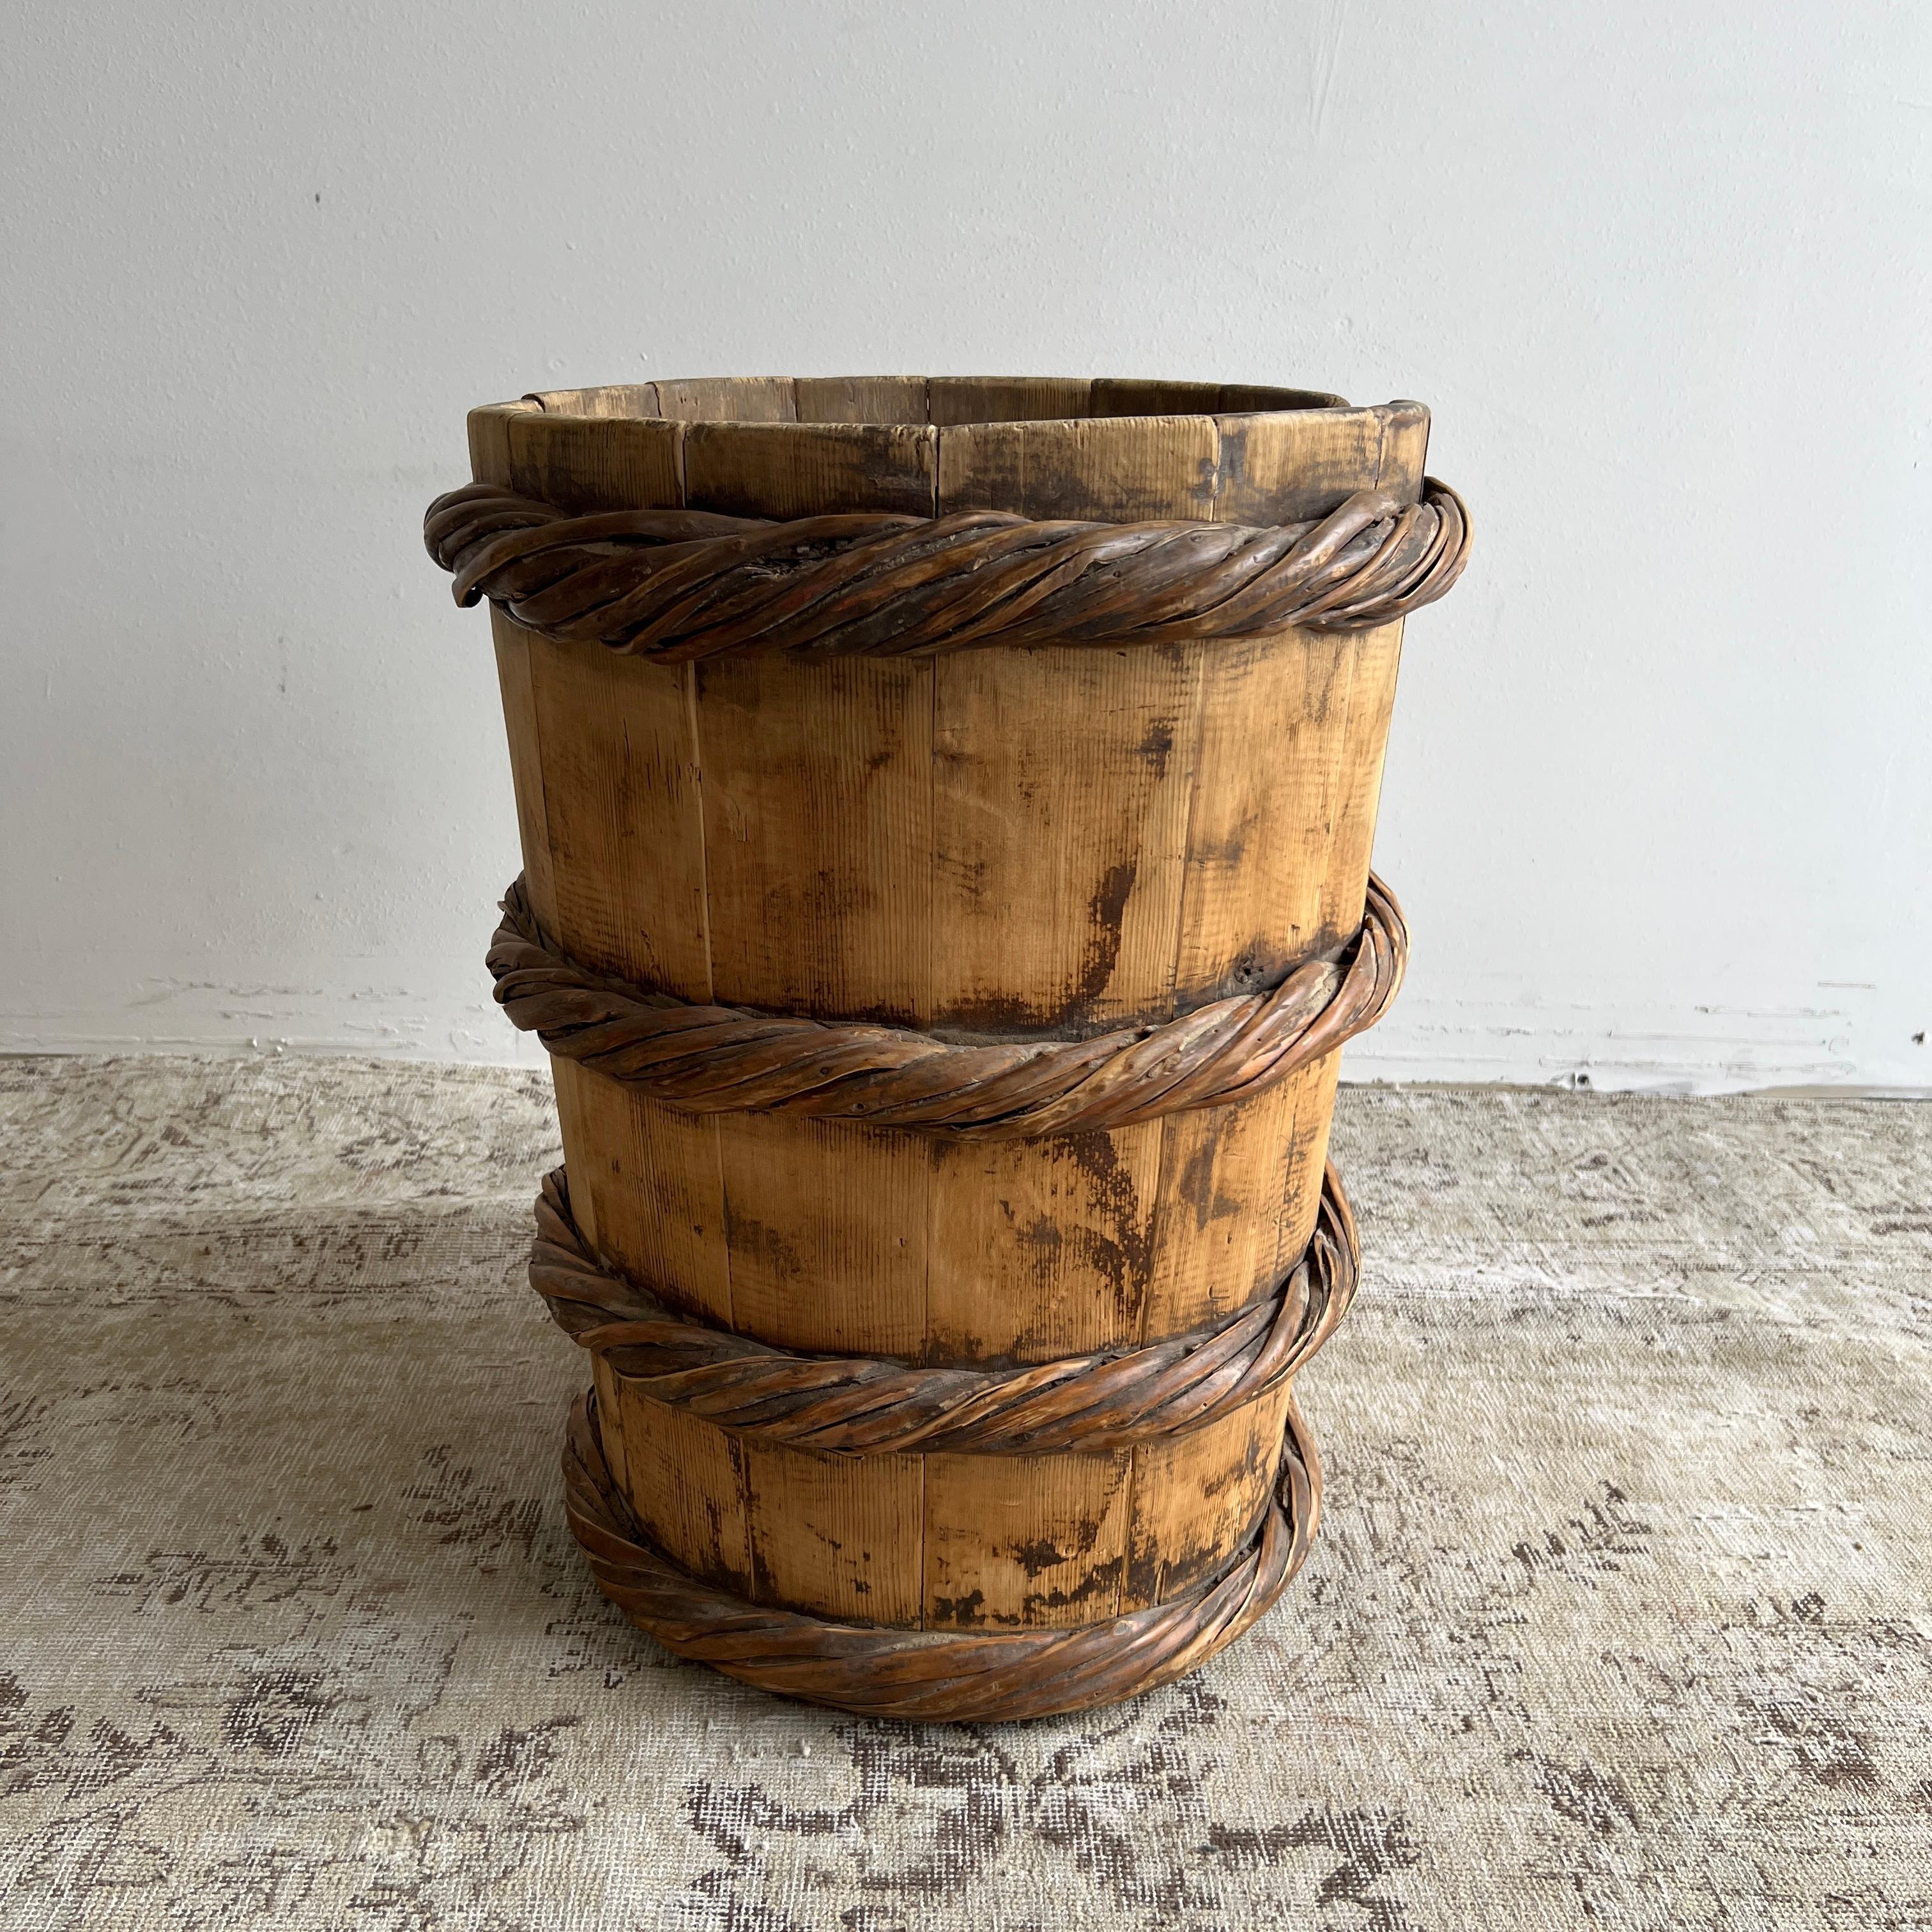 20th Century Cypress Wood Planter or Bucket for Plants or Trees